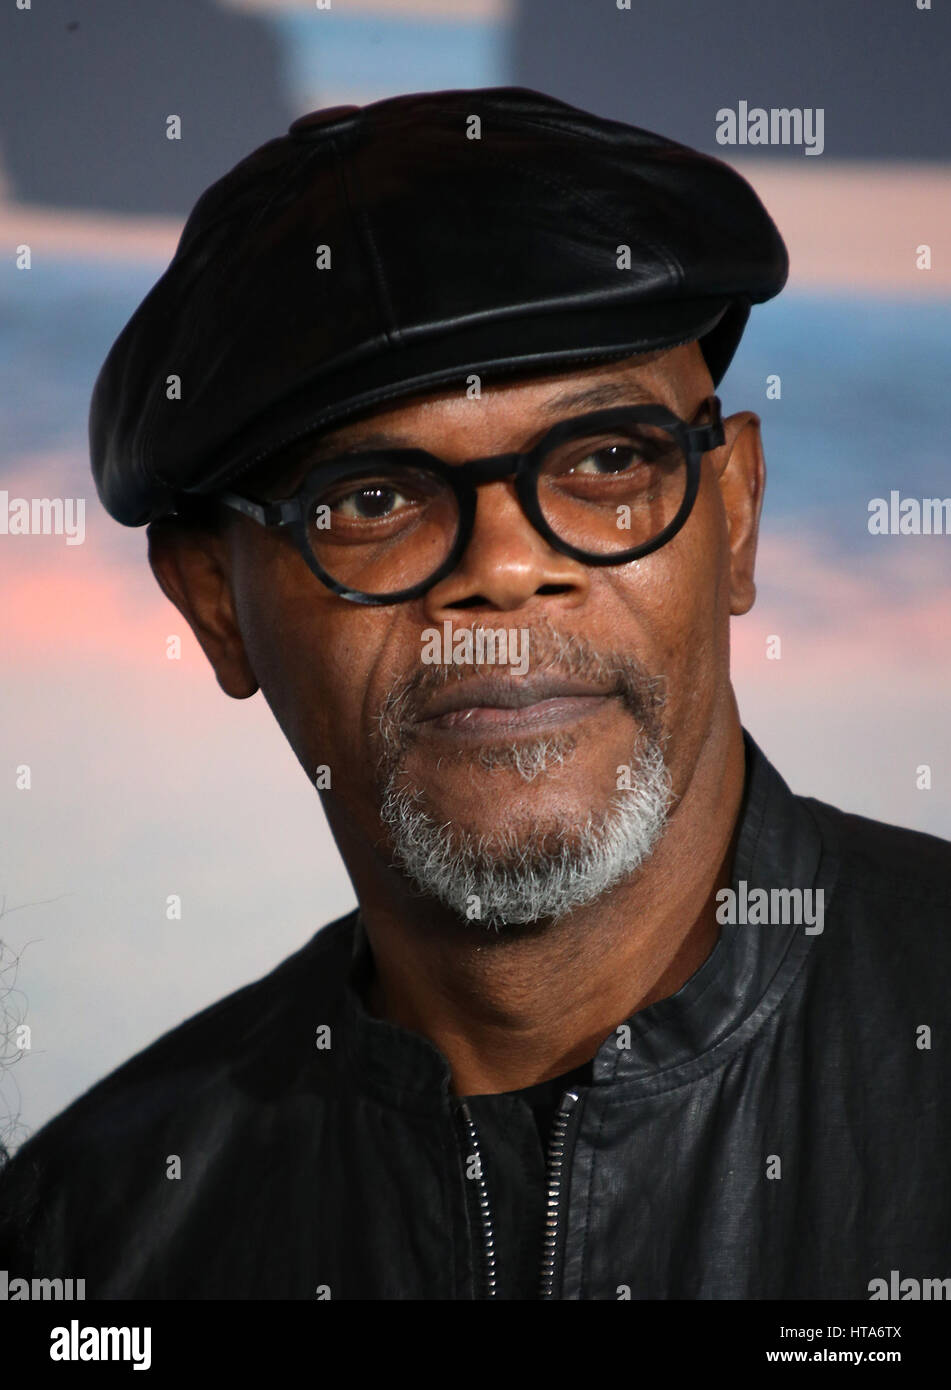 Hollywood, Ca. 08th Mar, 2017. Samuel L. Jackson, At Premiere Of Warner Bros. Pictures' 'Kong: Skull Island' At The Dolby Theatre In California on March 08, 2017. Credit: Fs/Media Punch/Alamy Live News Stock Photo